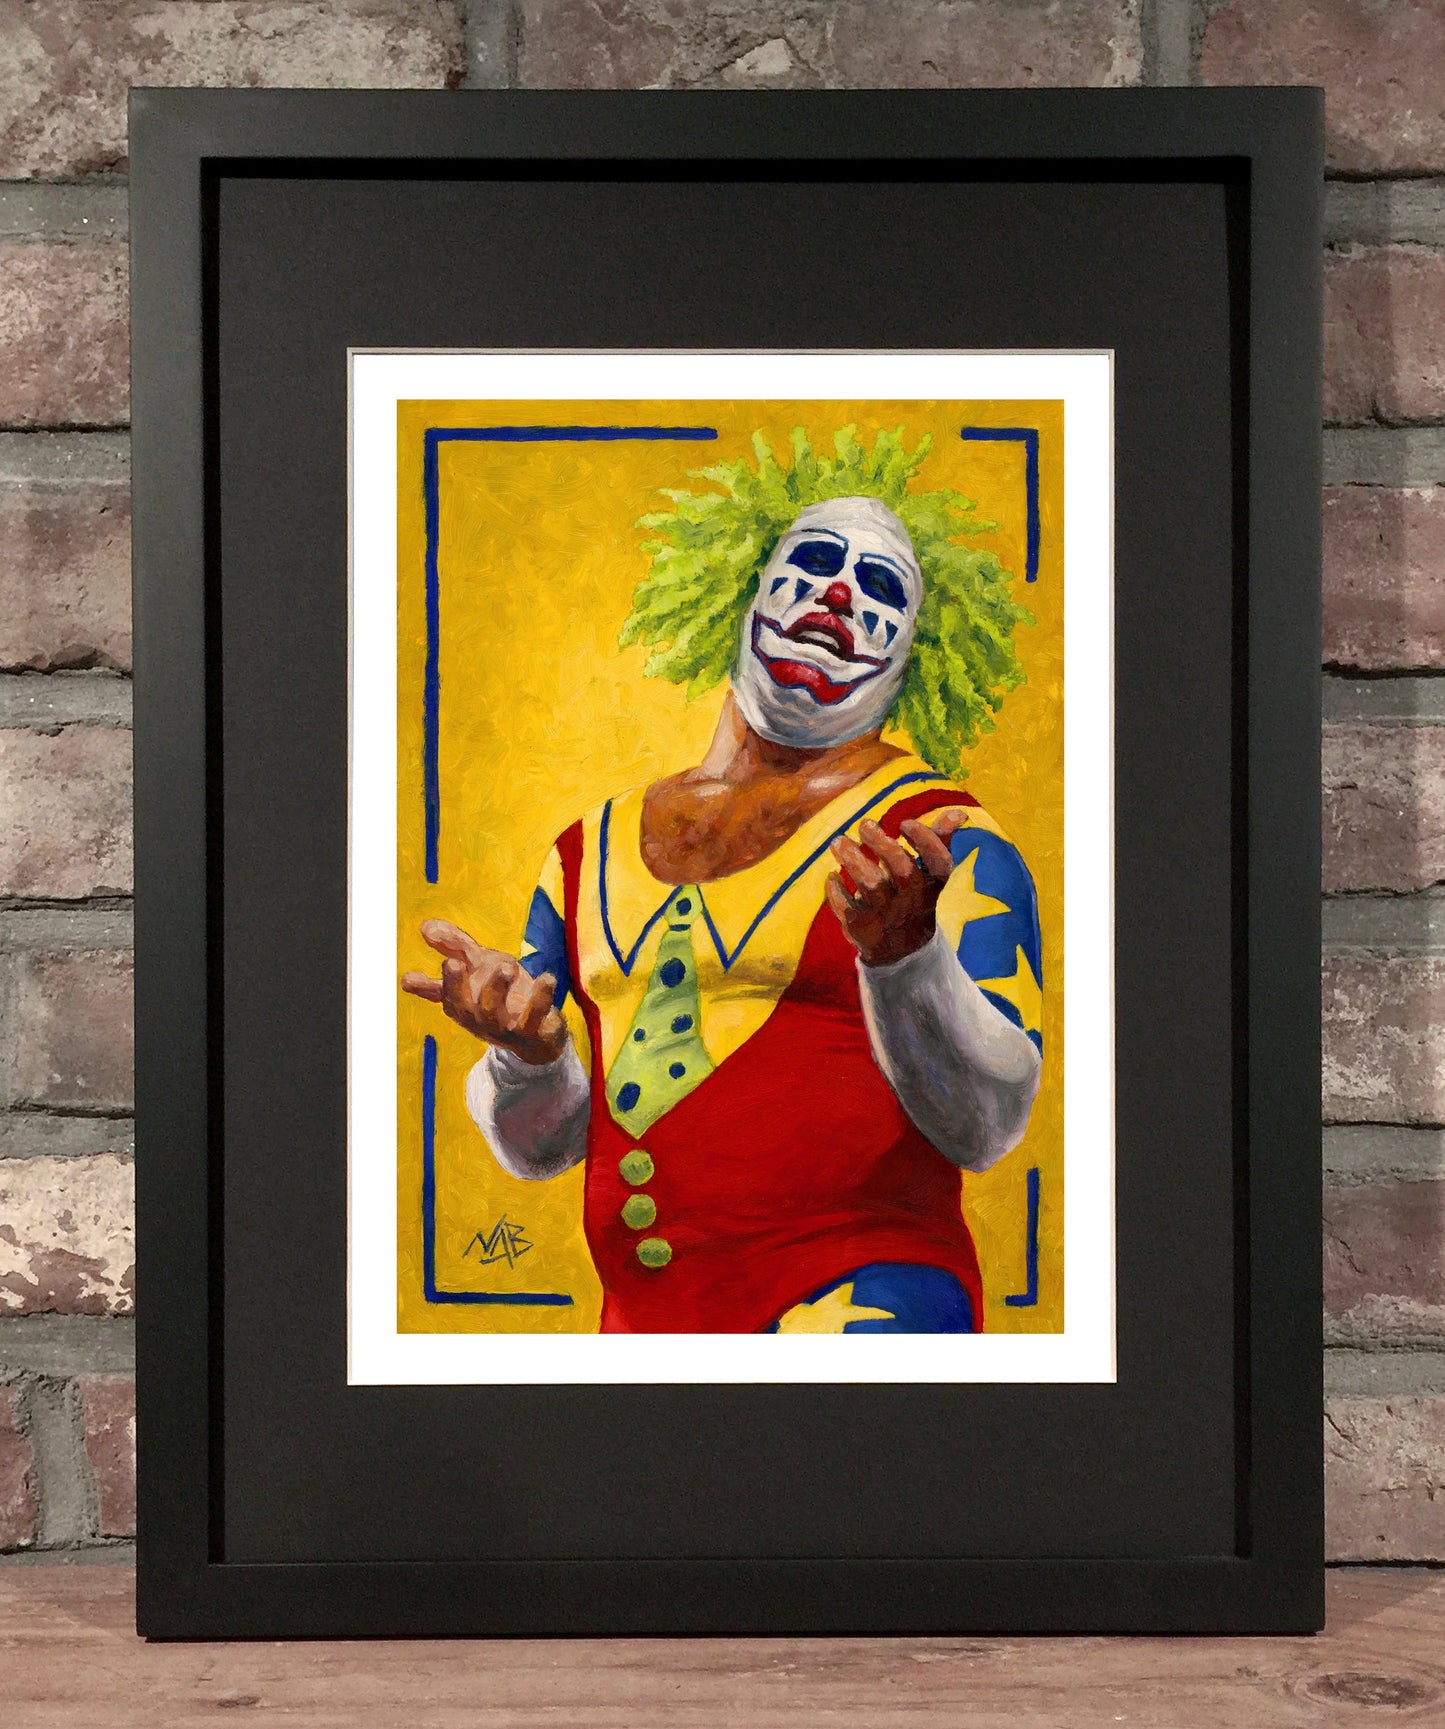 DOINK THE CLOWN // Oil on Paper - 9”x12” *ORIGINAL PAINTING*